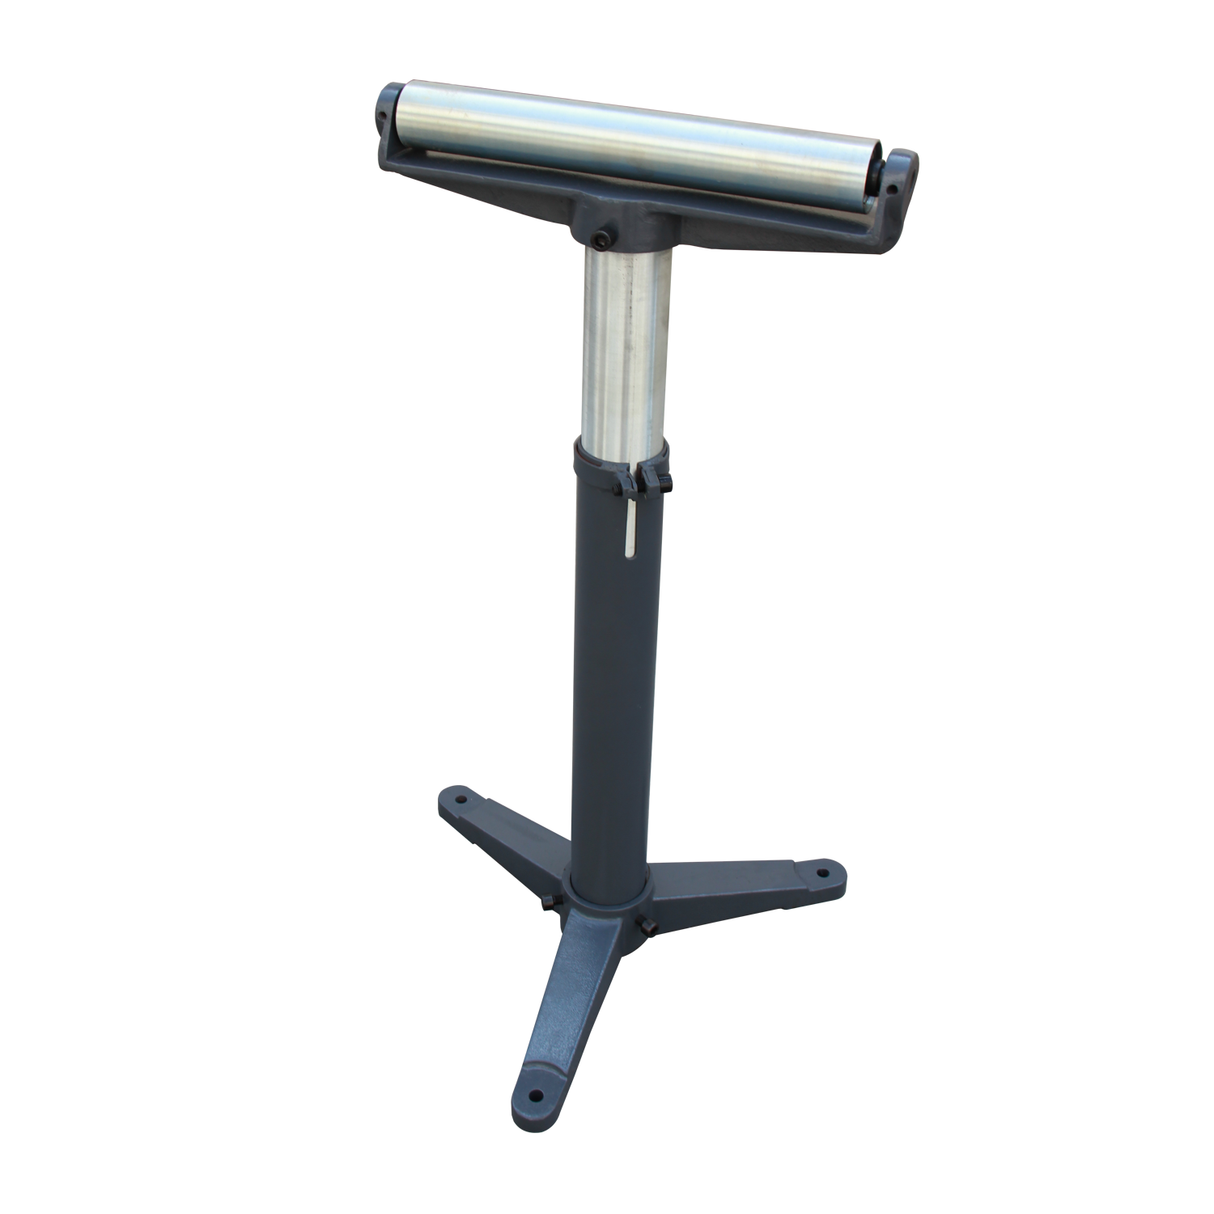 KANG Industrial RB-1100 Stands and Supports, Adjustable 620mm to 1100mm Tall Pedestal Roller Stand with Ball Bearing Roller, 300kg Material Support